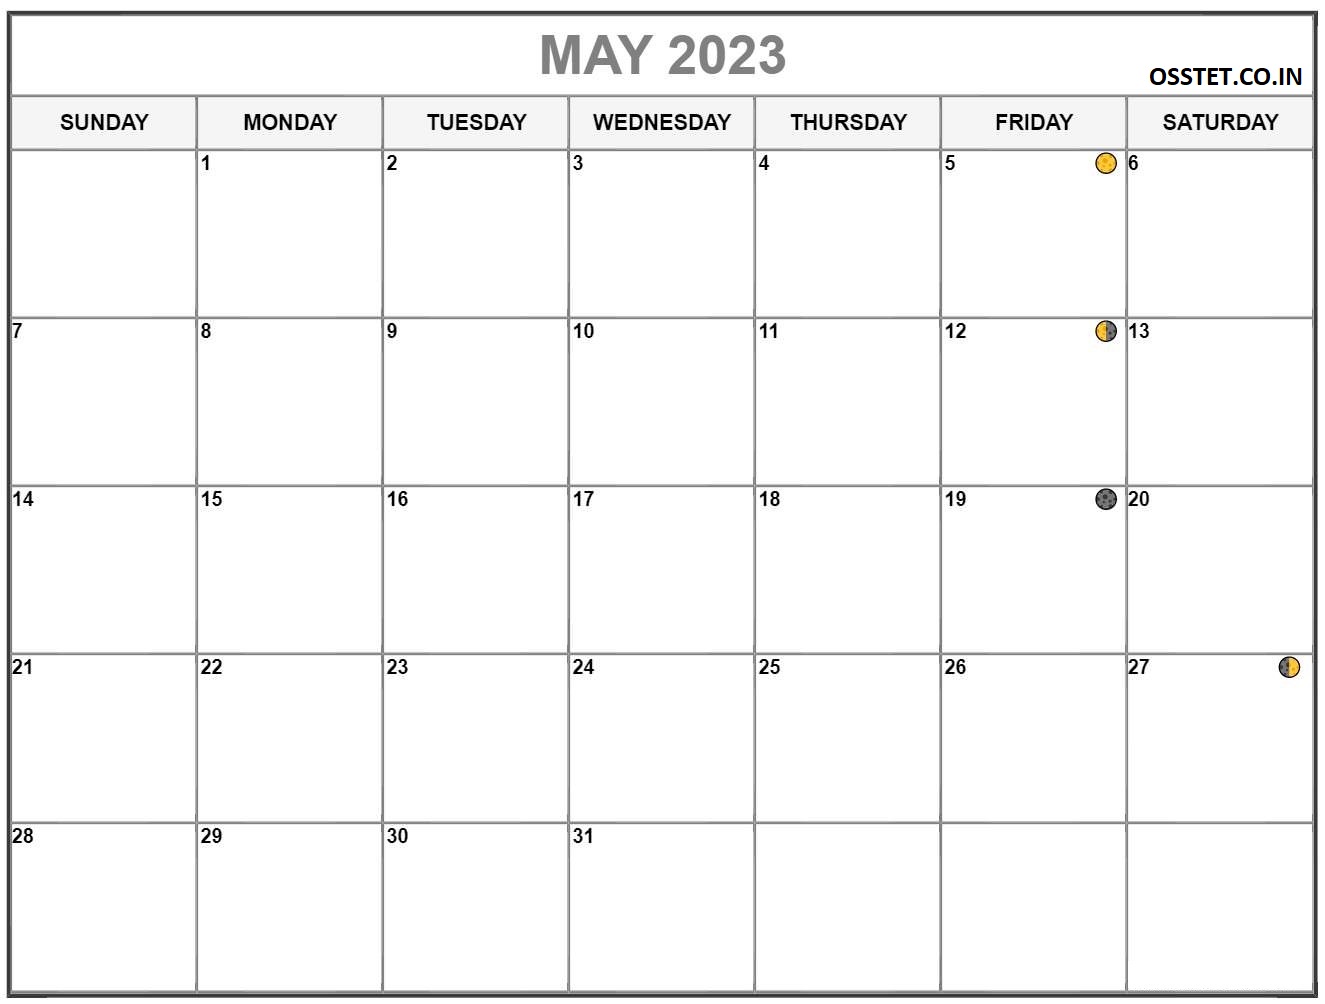 May 2023 lunar calendar with moon phases